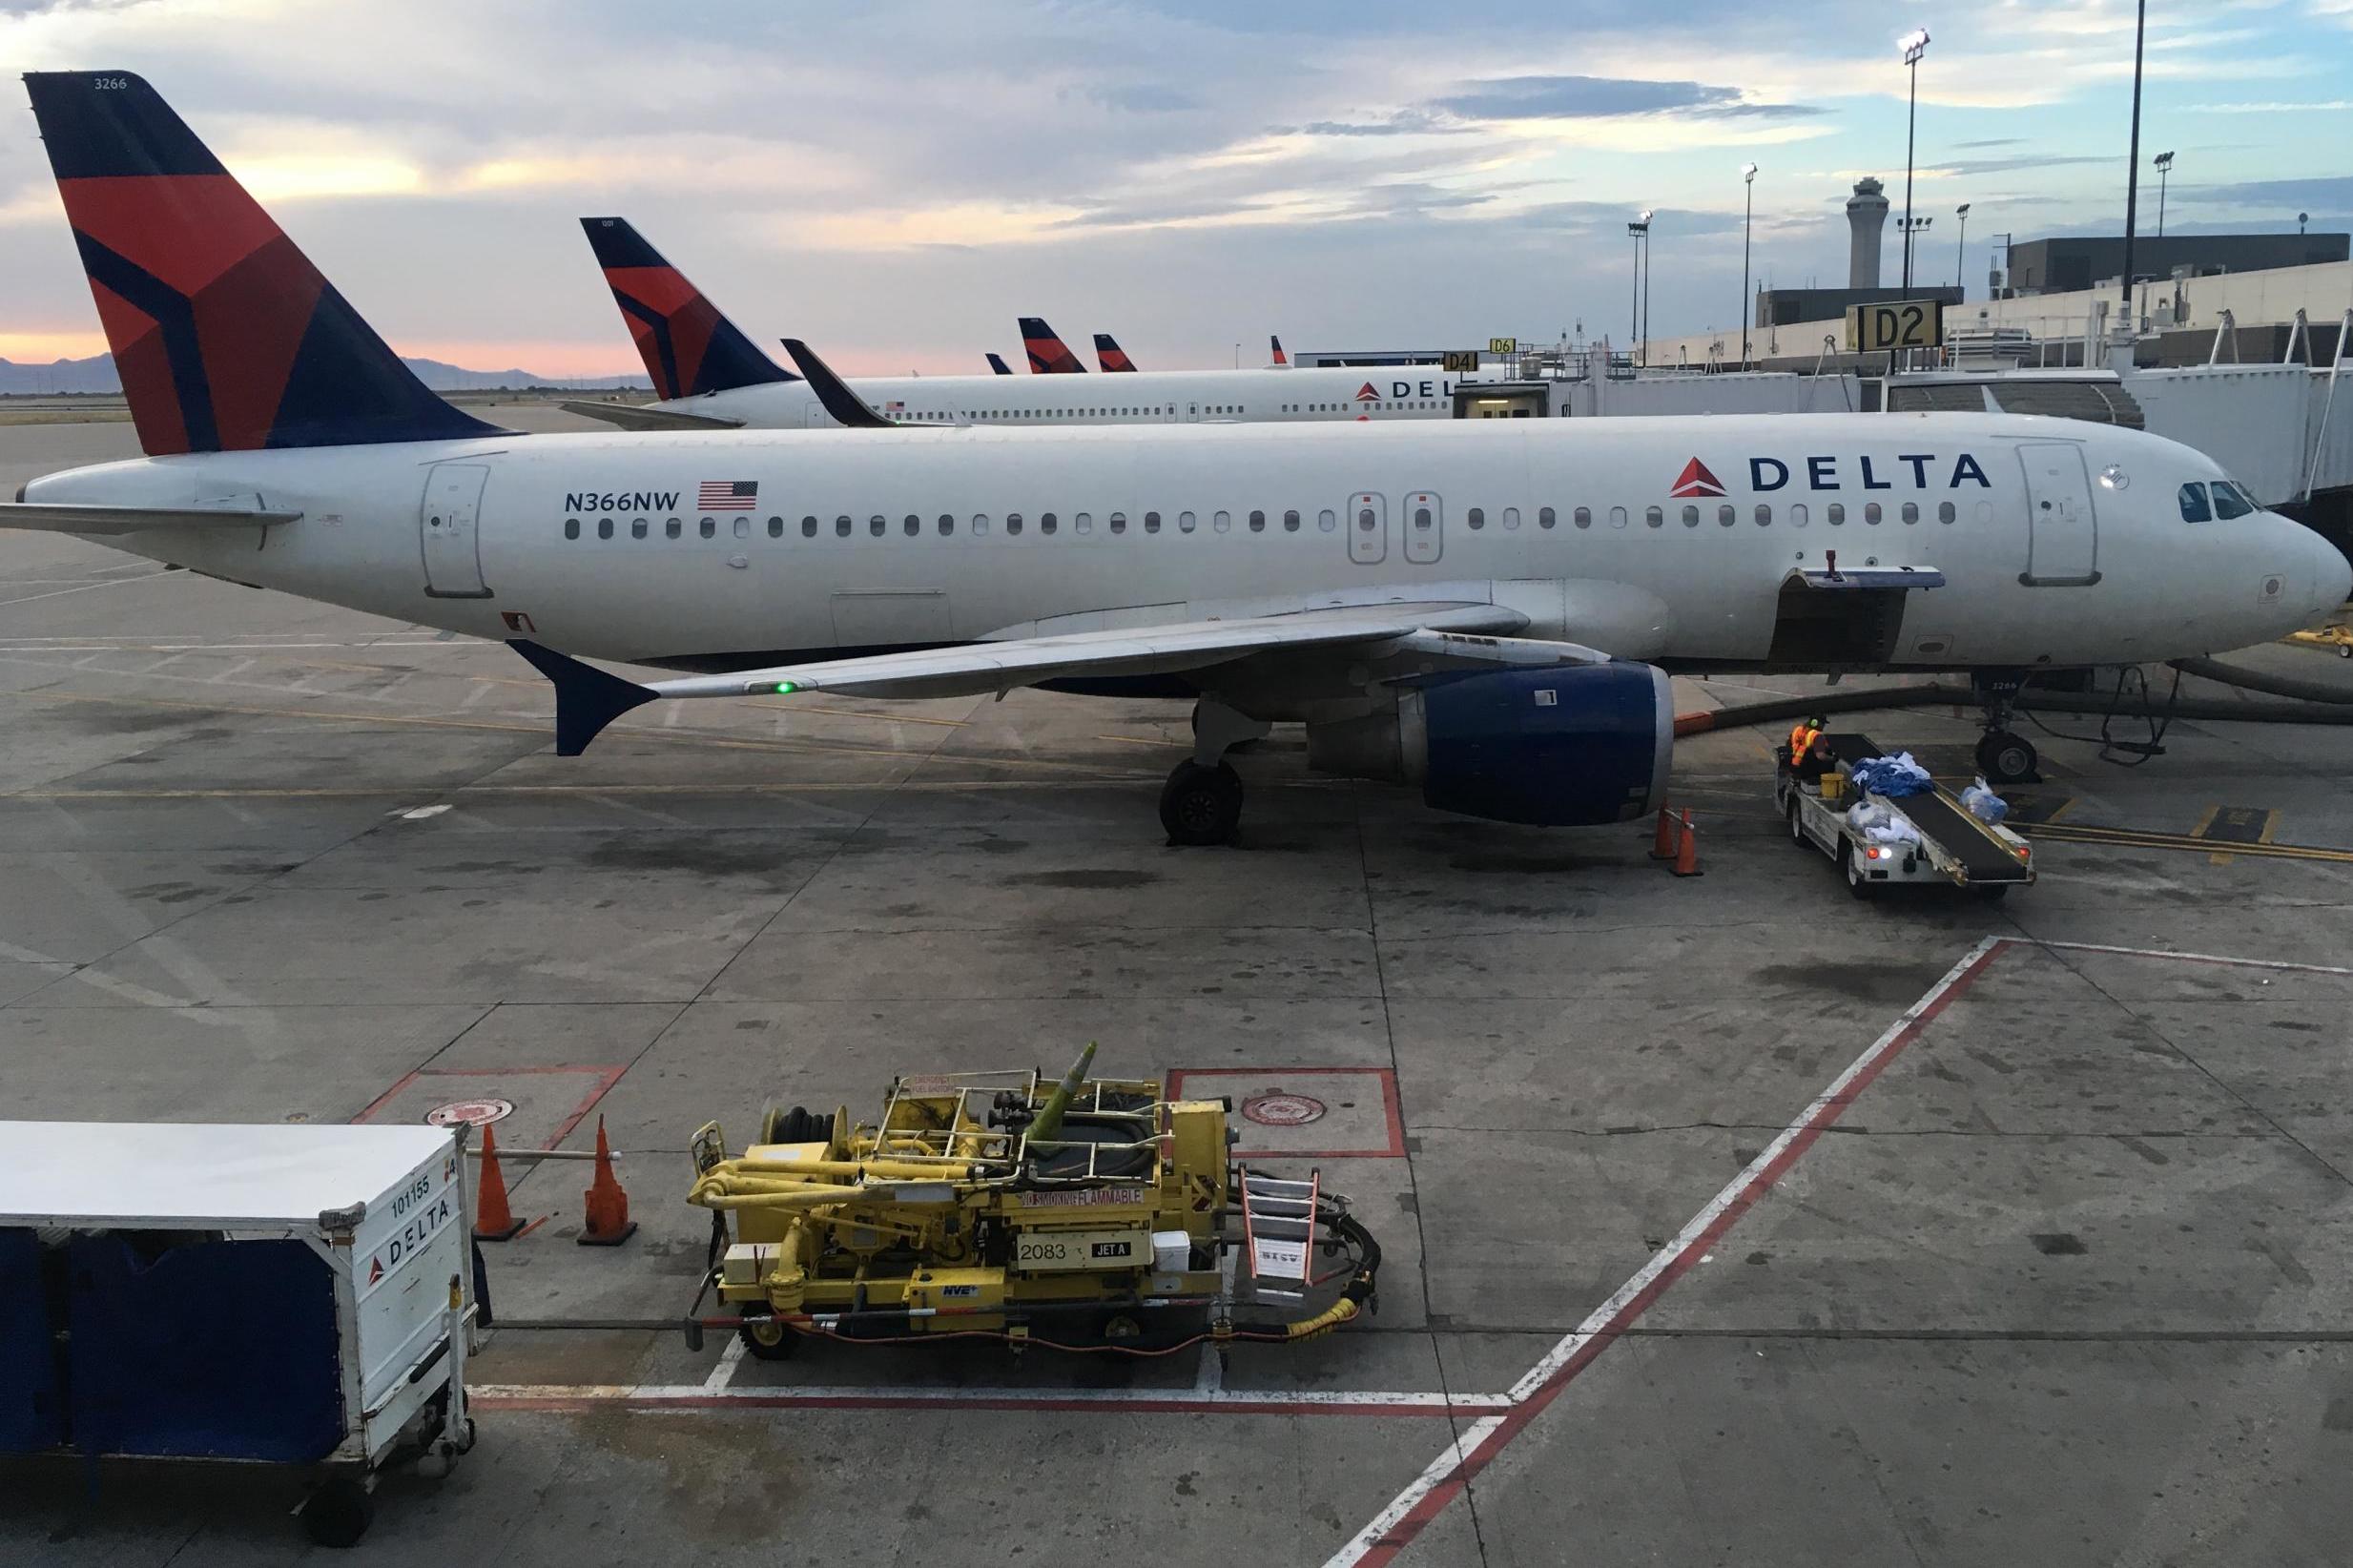 Spare seats? Delta used to offer an unlimited travel airpass